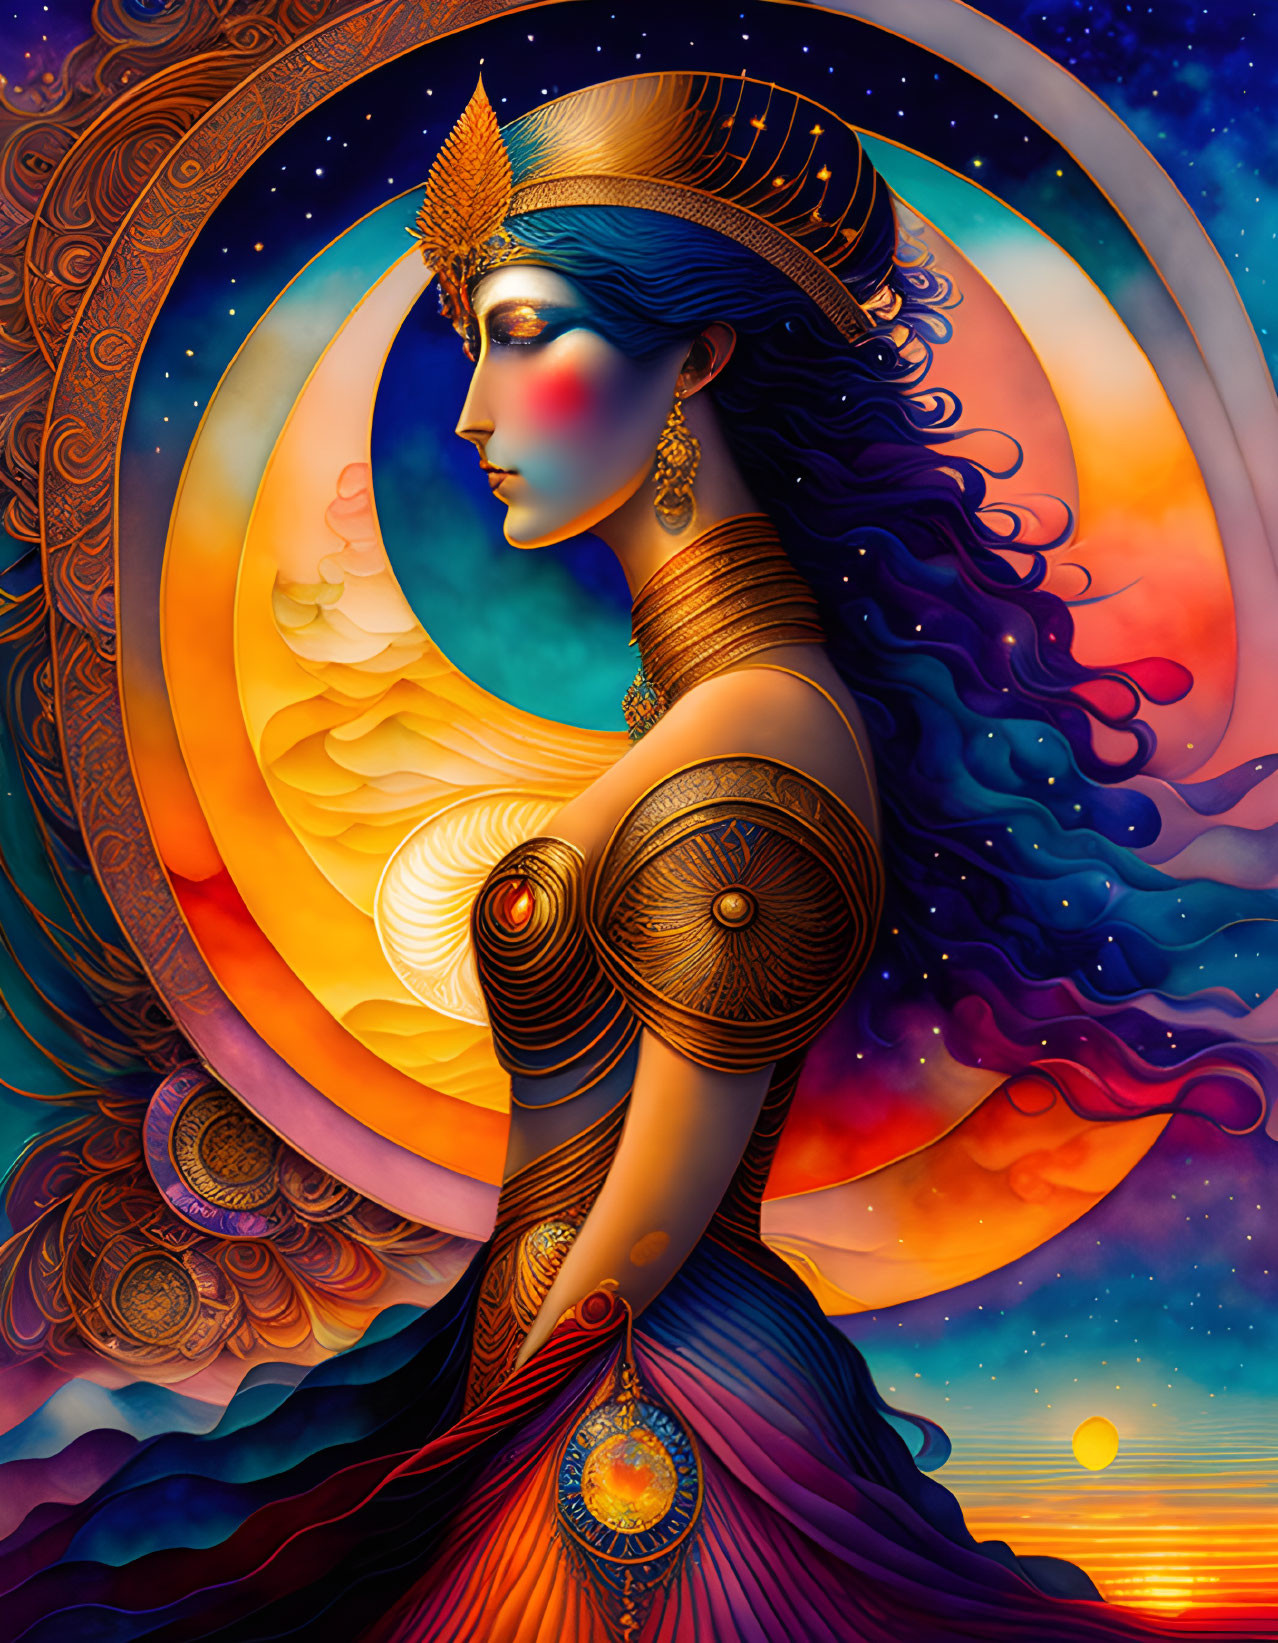 Detailed illustration of blue-skinned woman in golden attire amidst cosmic background